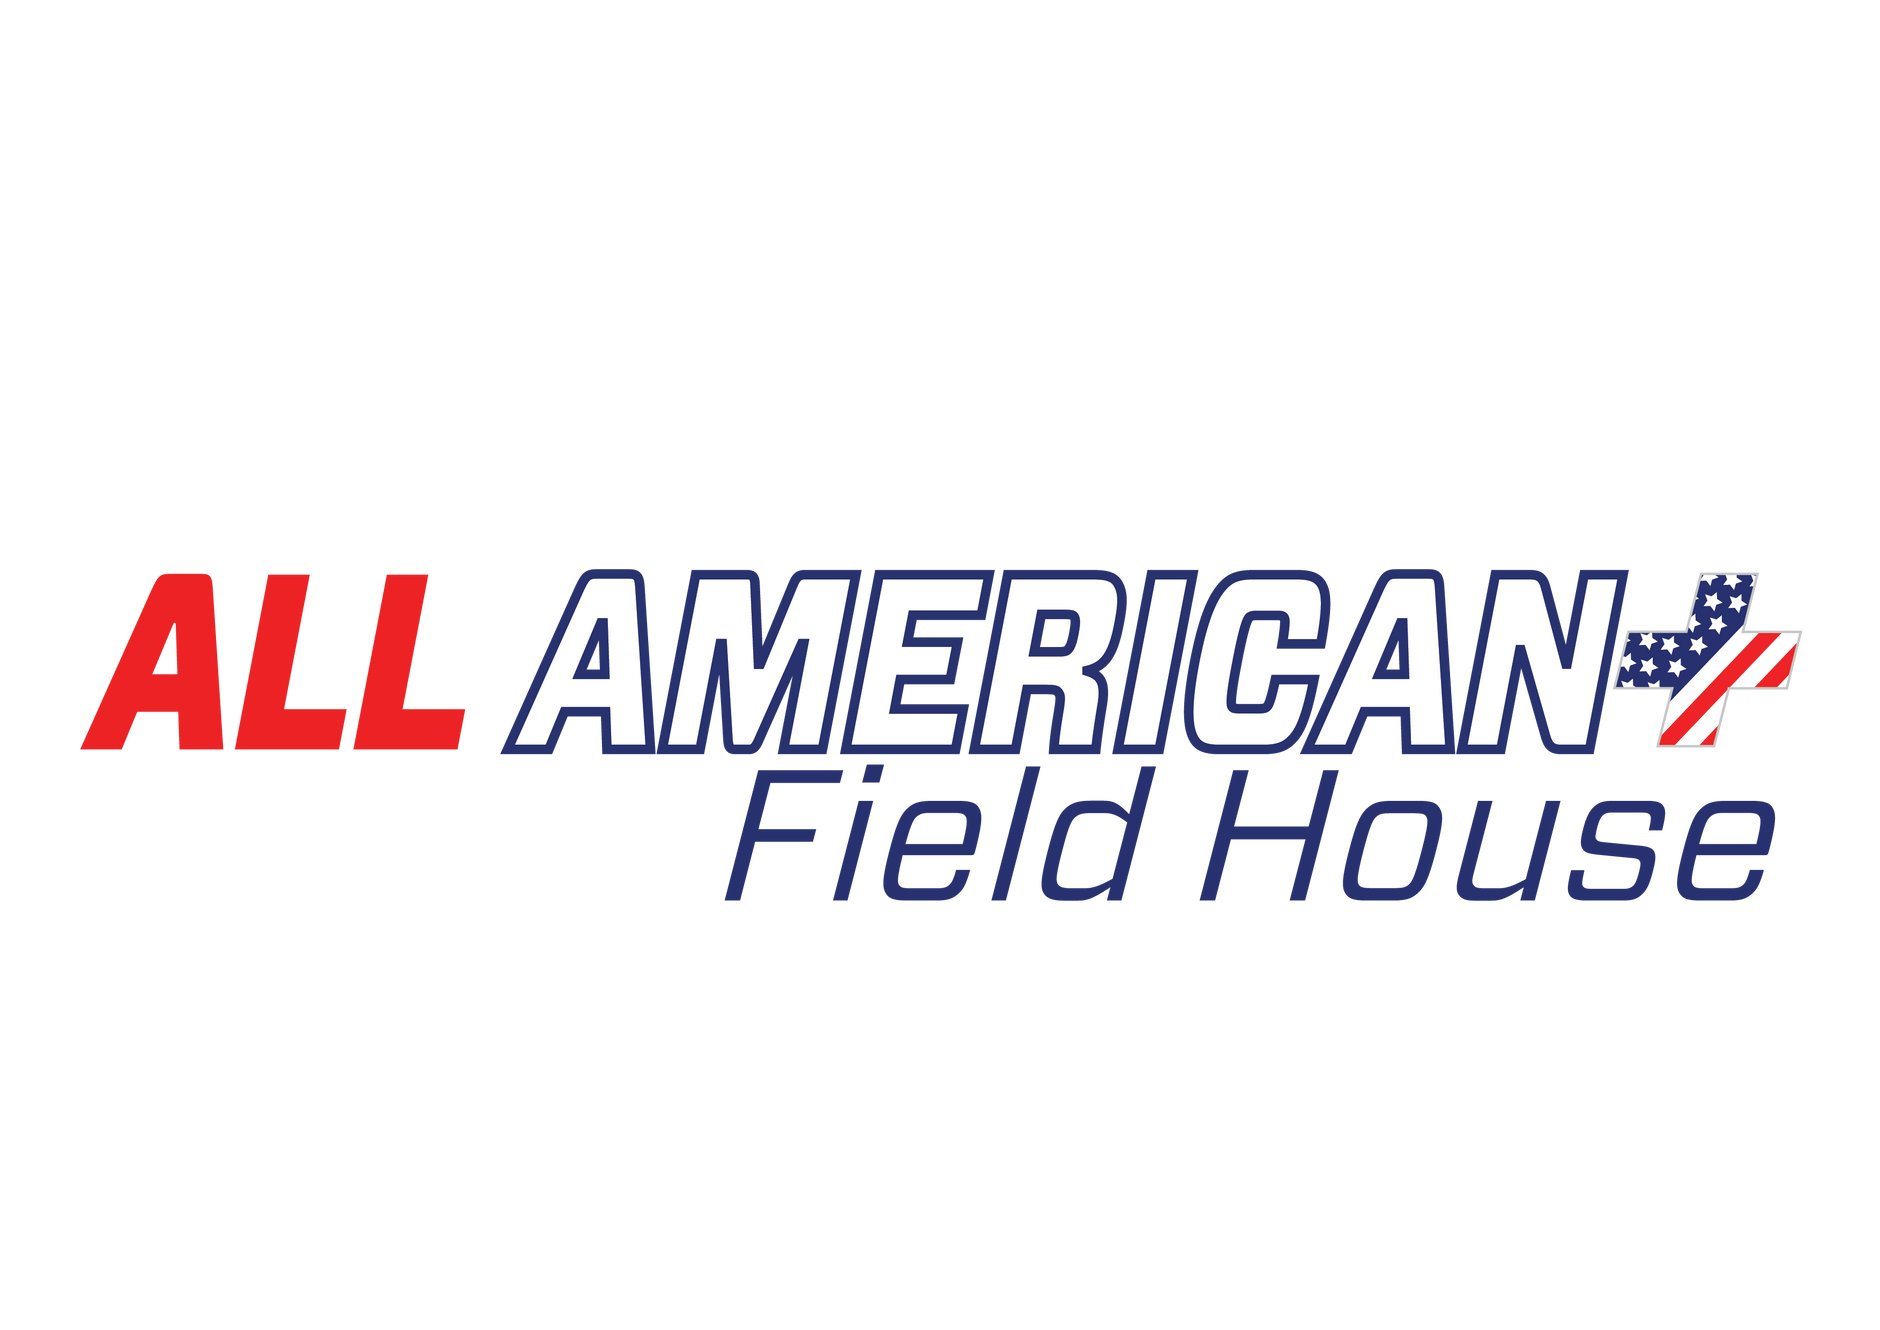 All American Field House